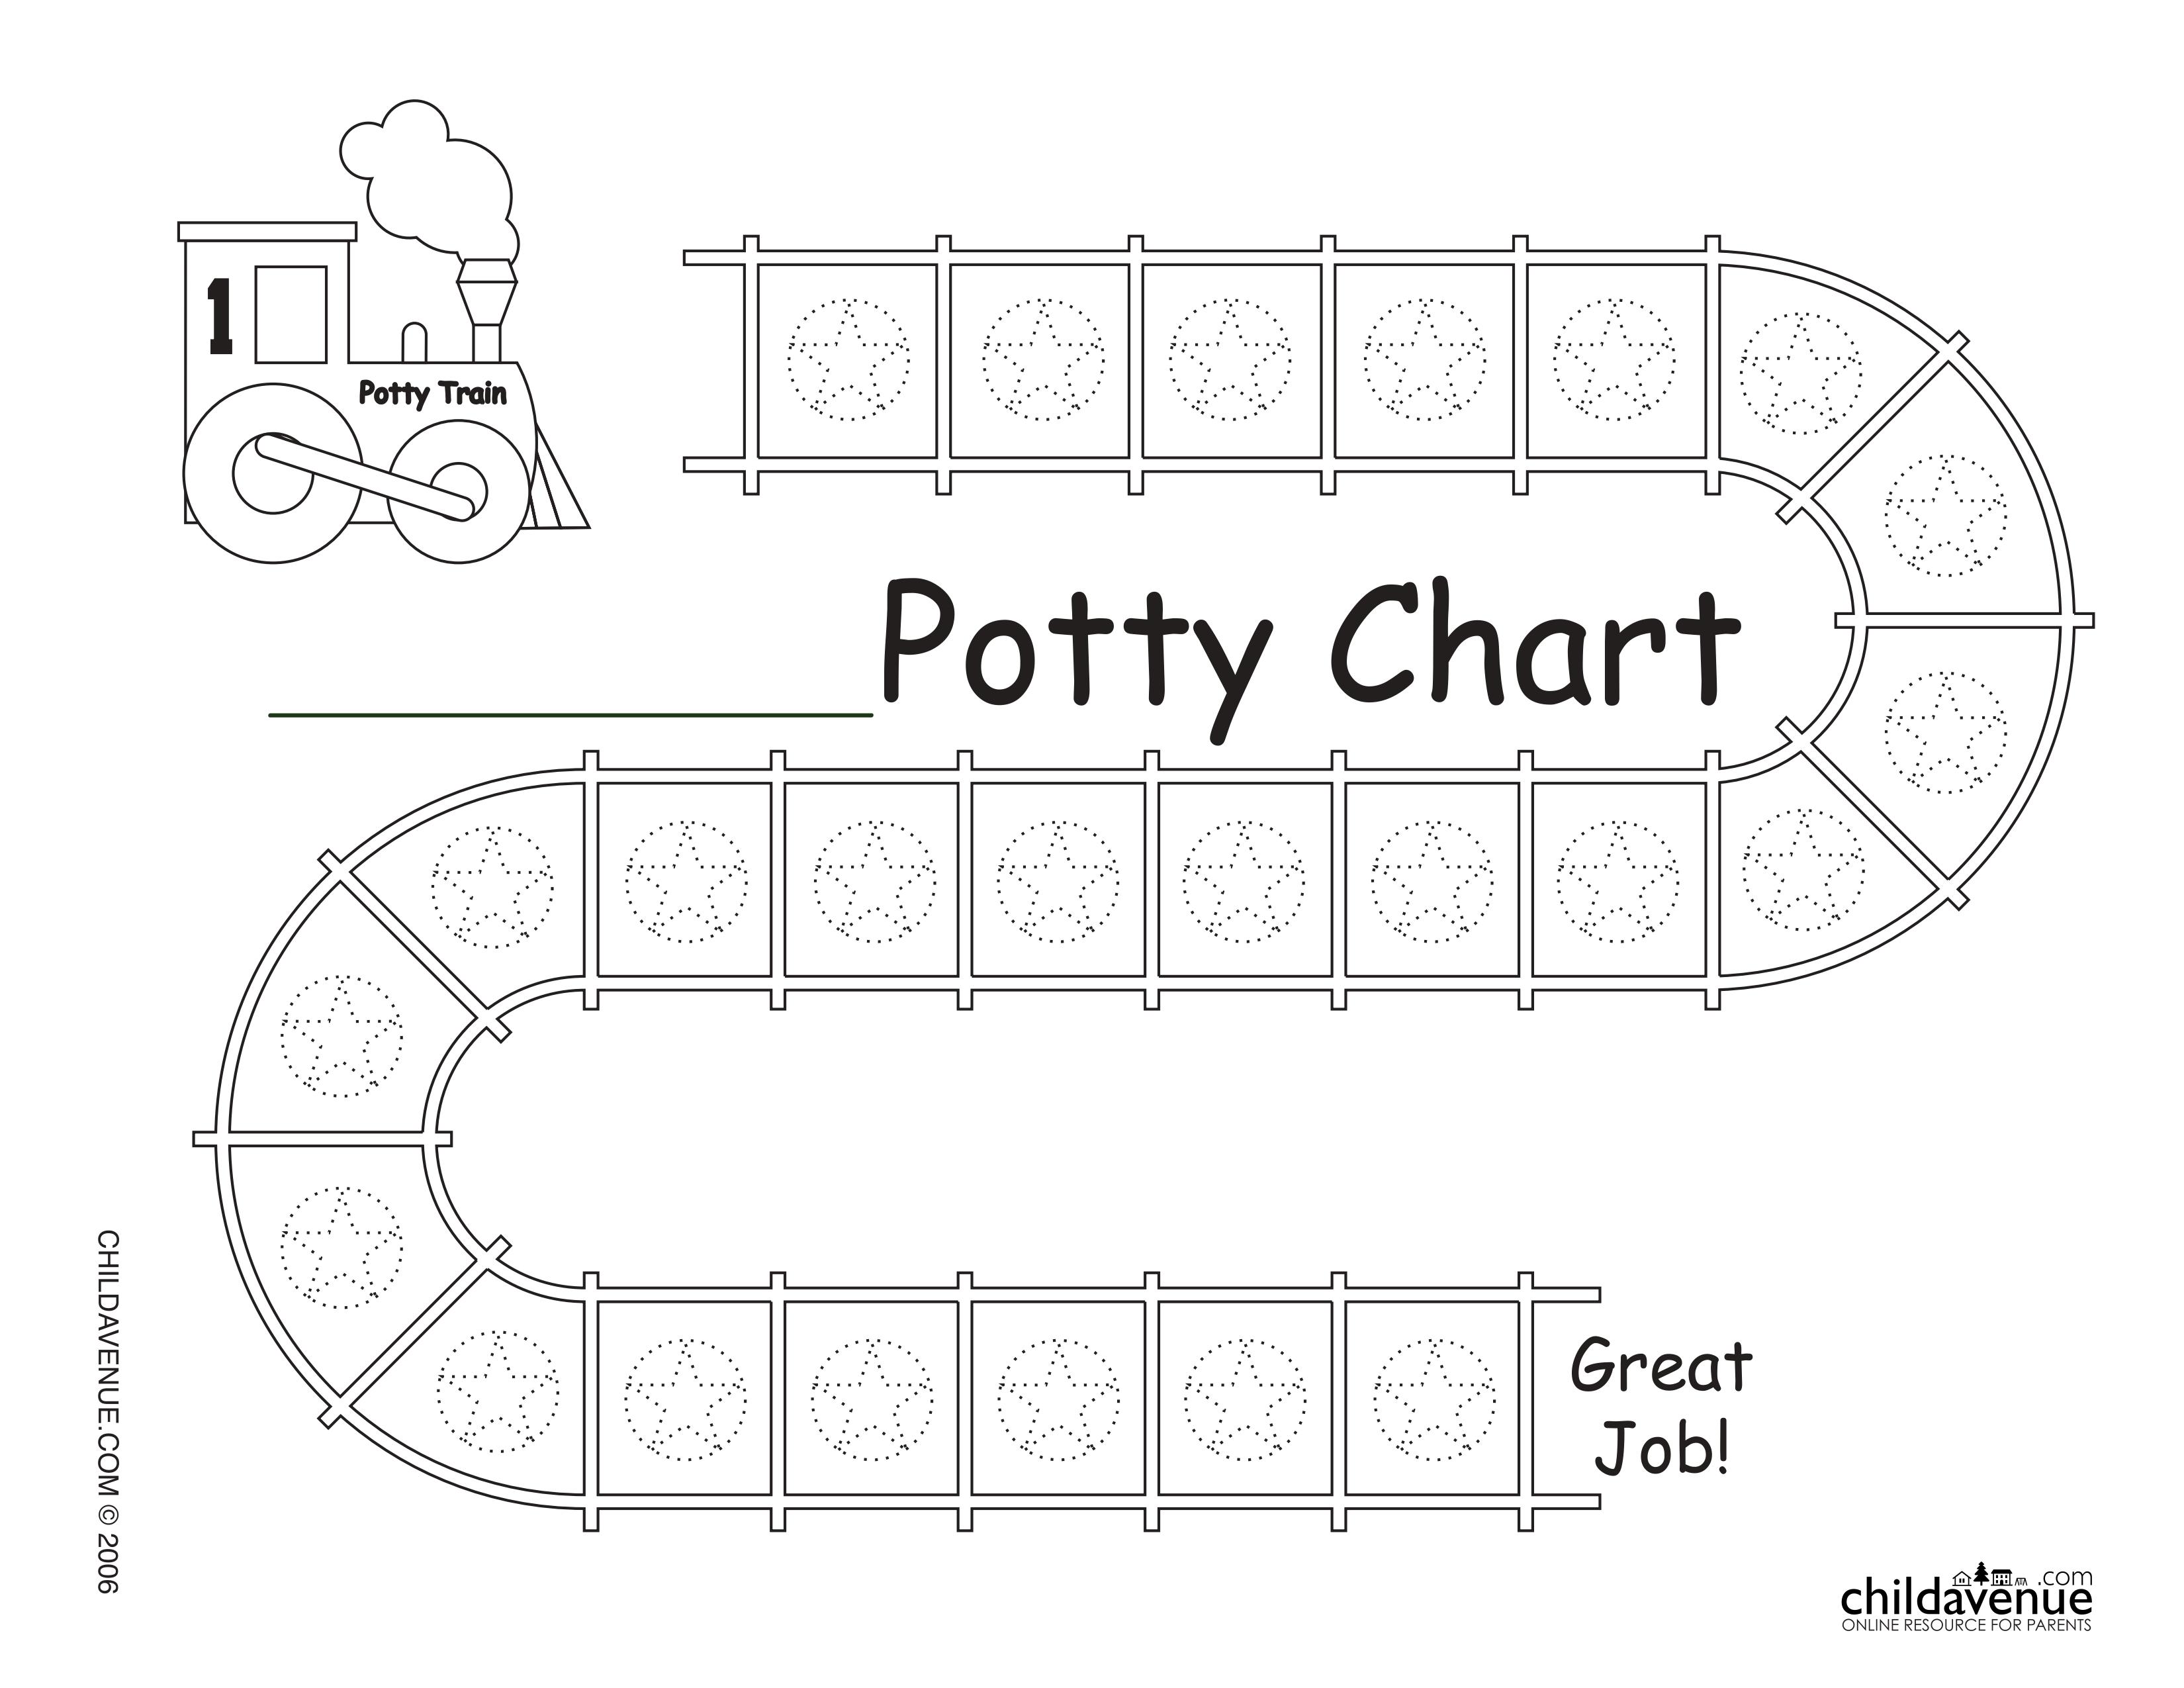 Potty Training Sticker Chart Free Printable Get Your Hands On Amazing Free Printables 